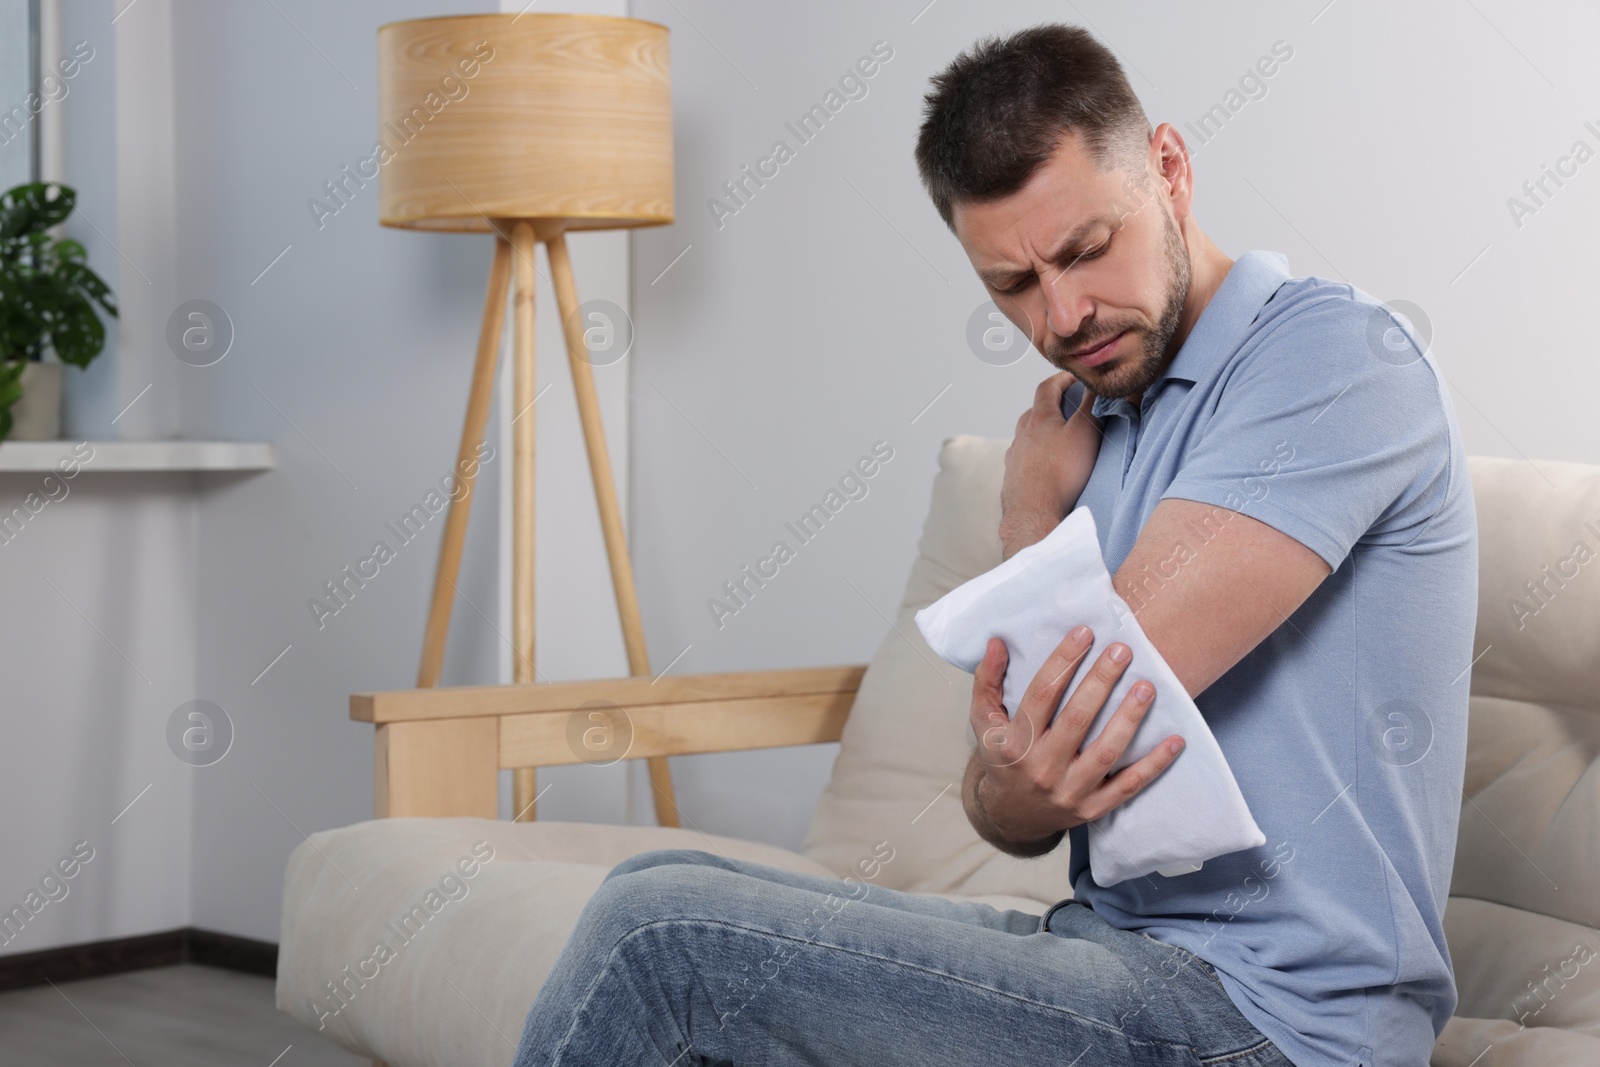 Photo of Man using heating pad at home, space for text